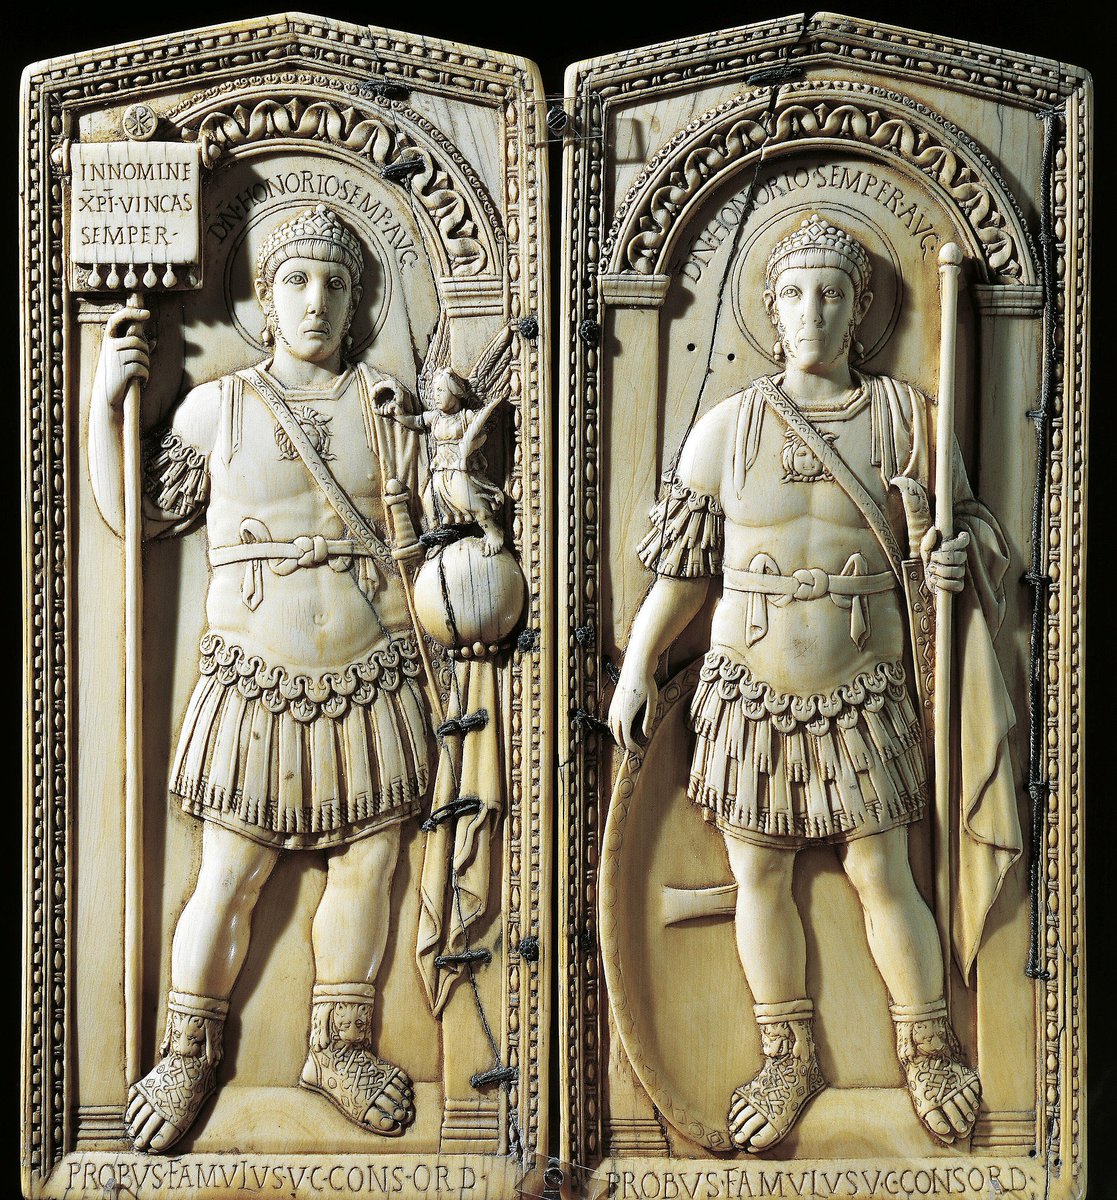 #ReliefWednesday This diptych shows Petronius Probus, consul in the west in 406 with the emperor Honorius (a guy who didn’t really live up to the name!). Probus describes himself as the ‘famulus’ of Honorius…